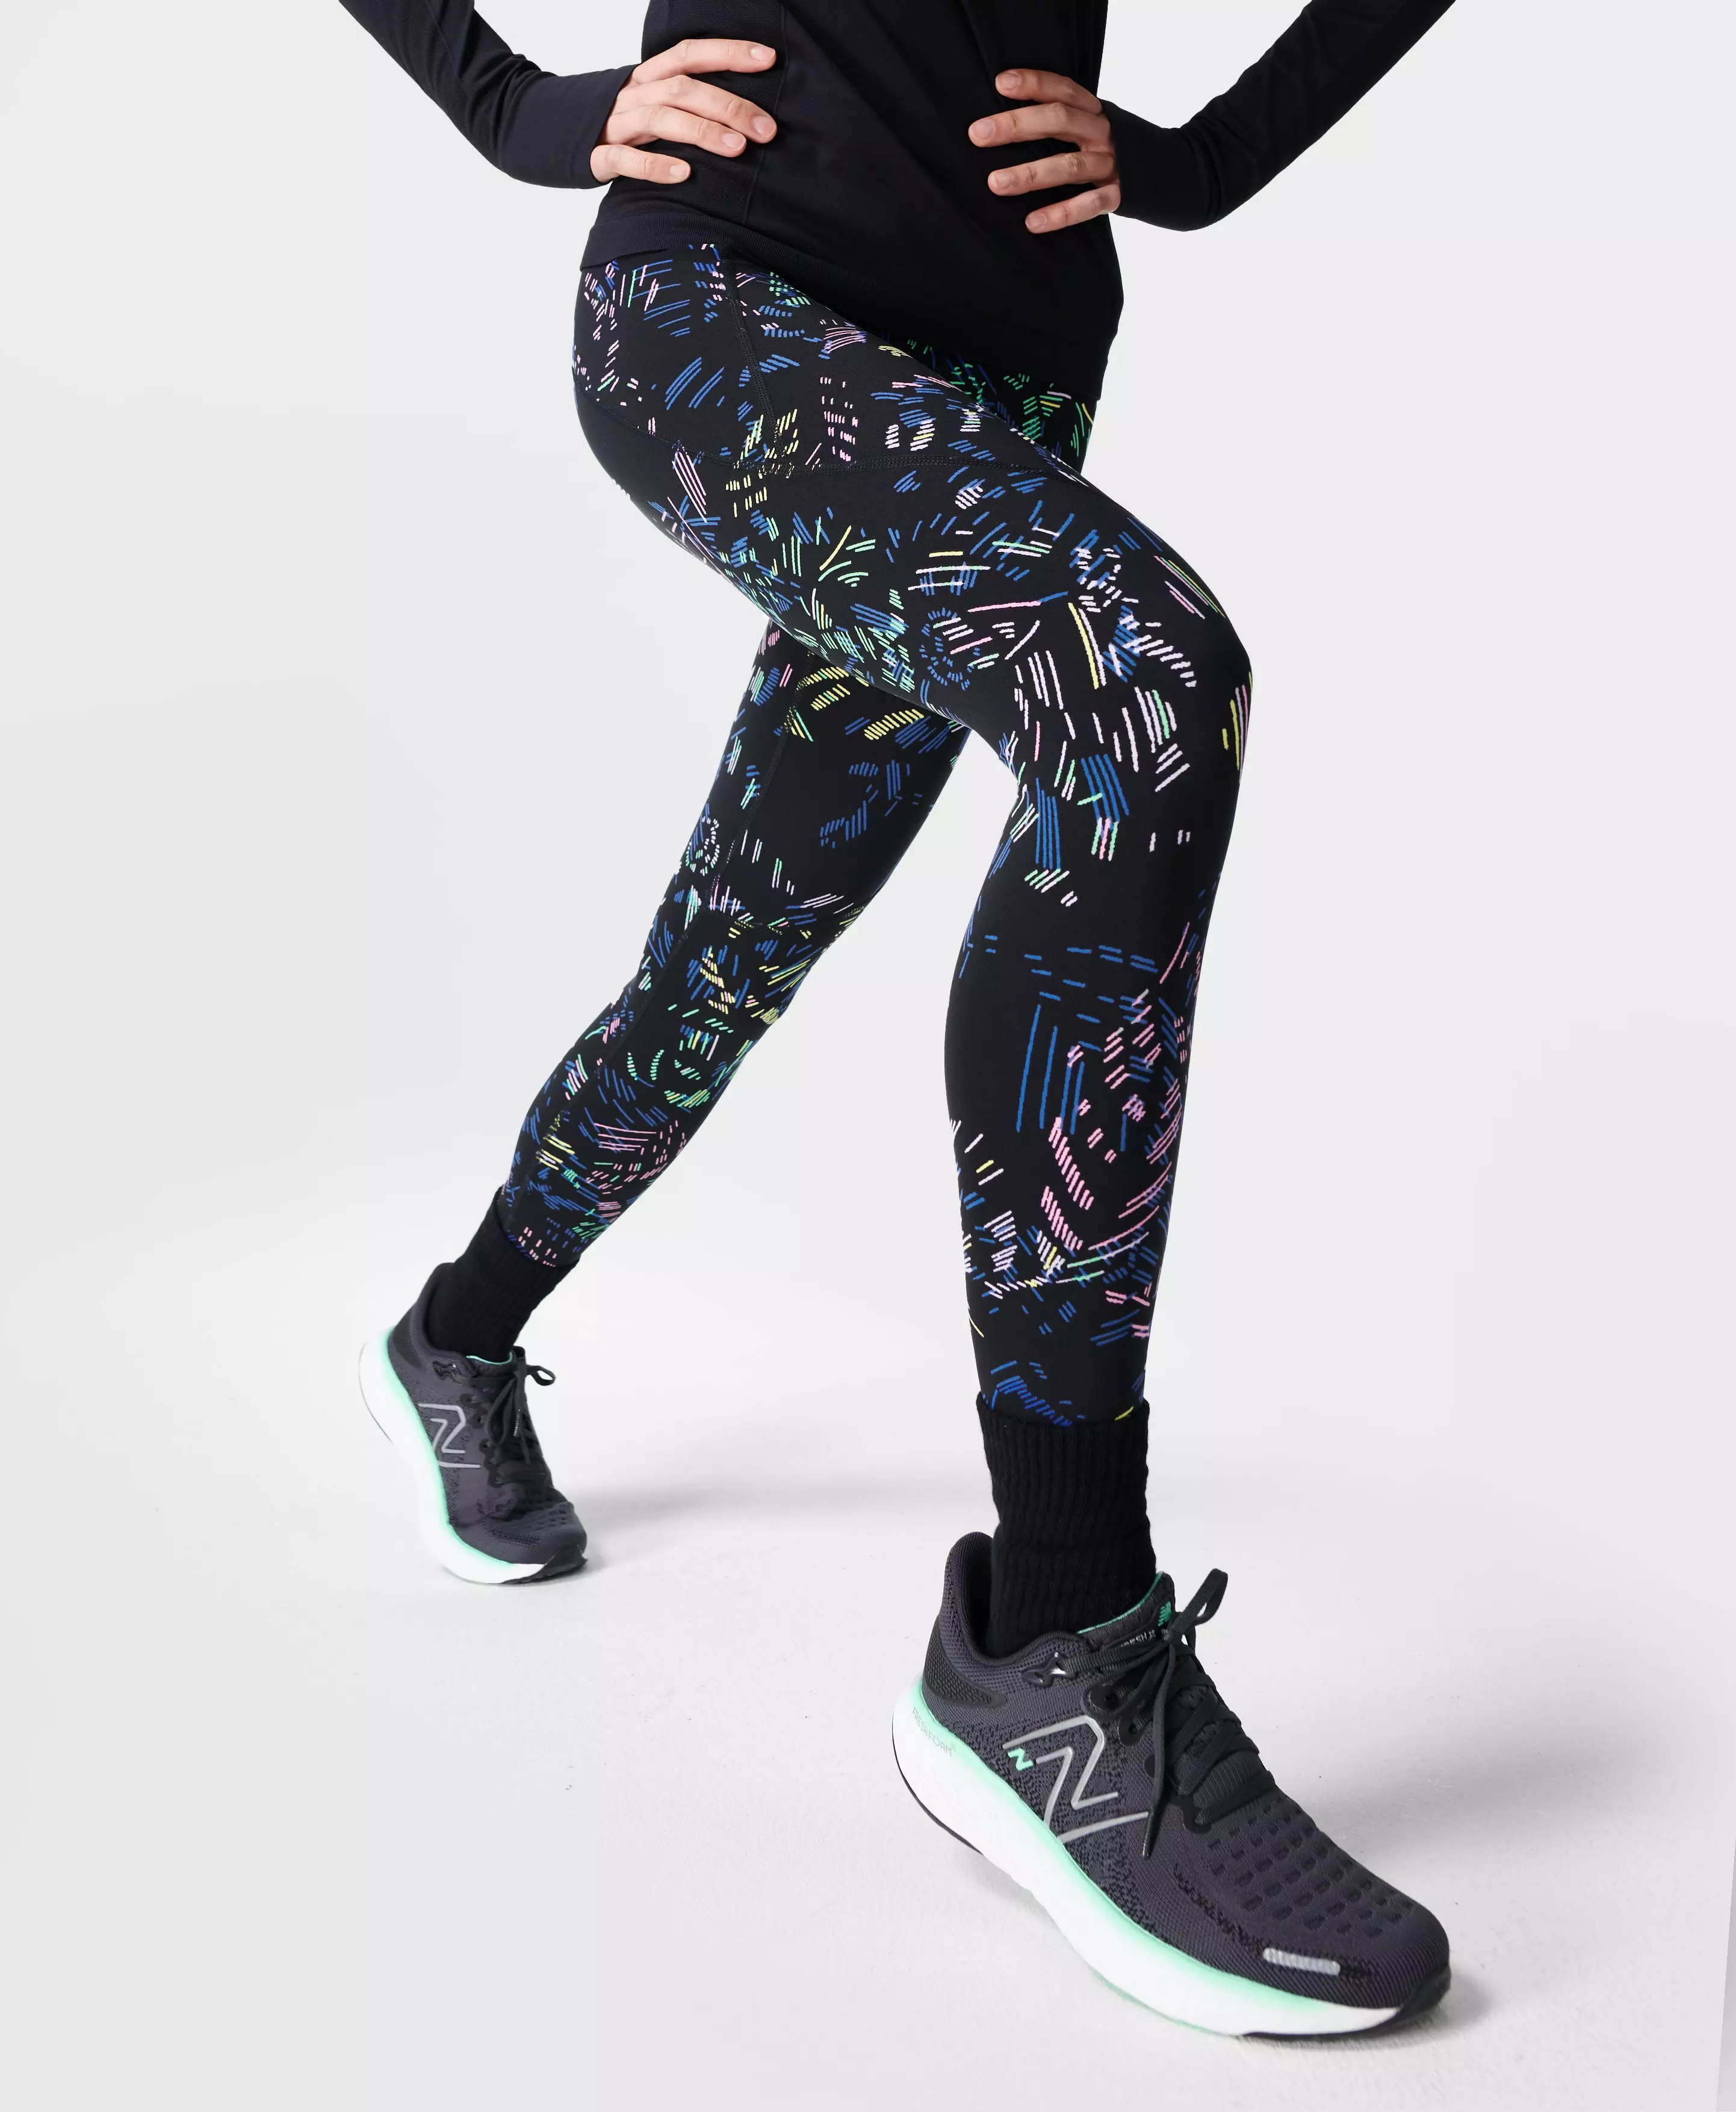 Floral Refract Power 7/8 Workout Leggings